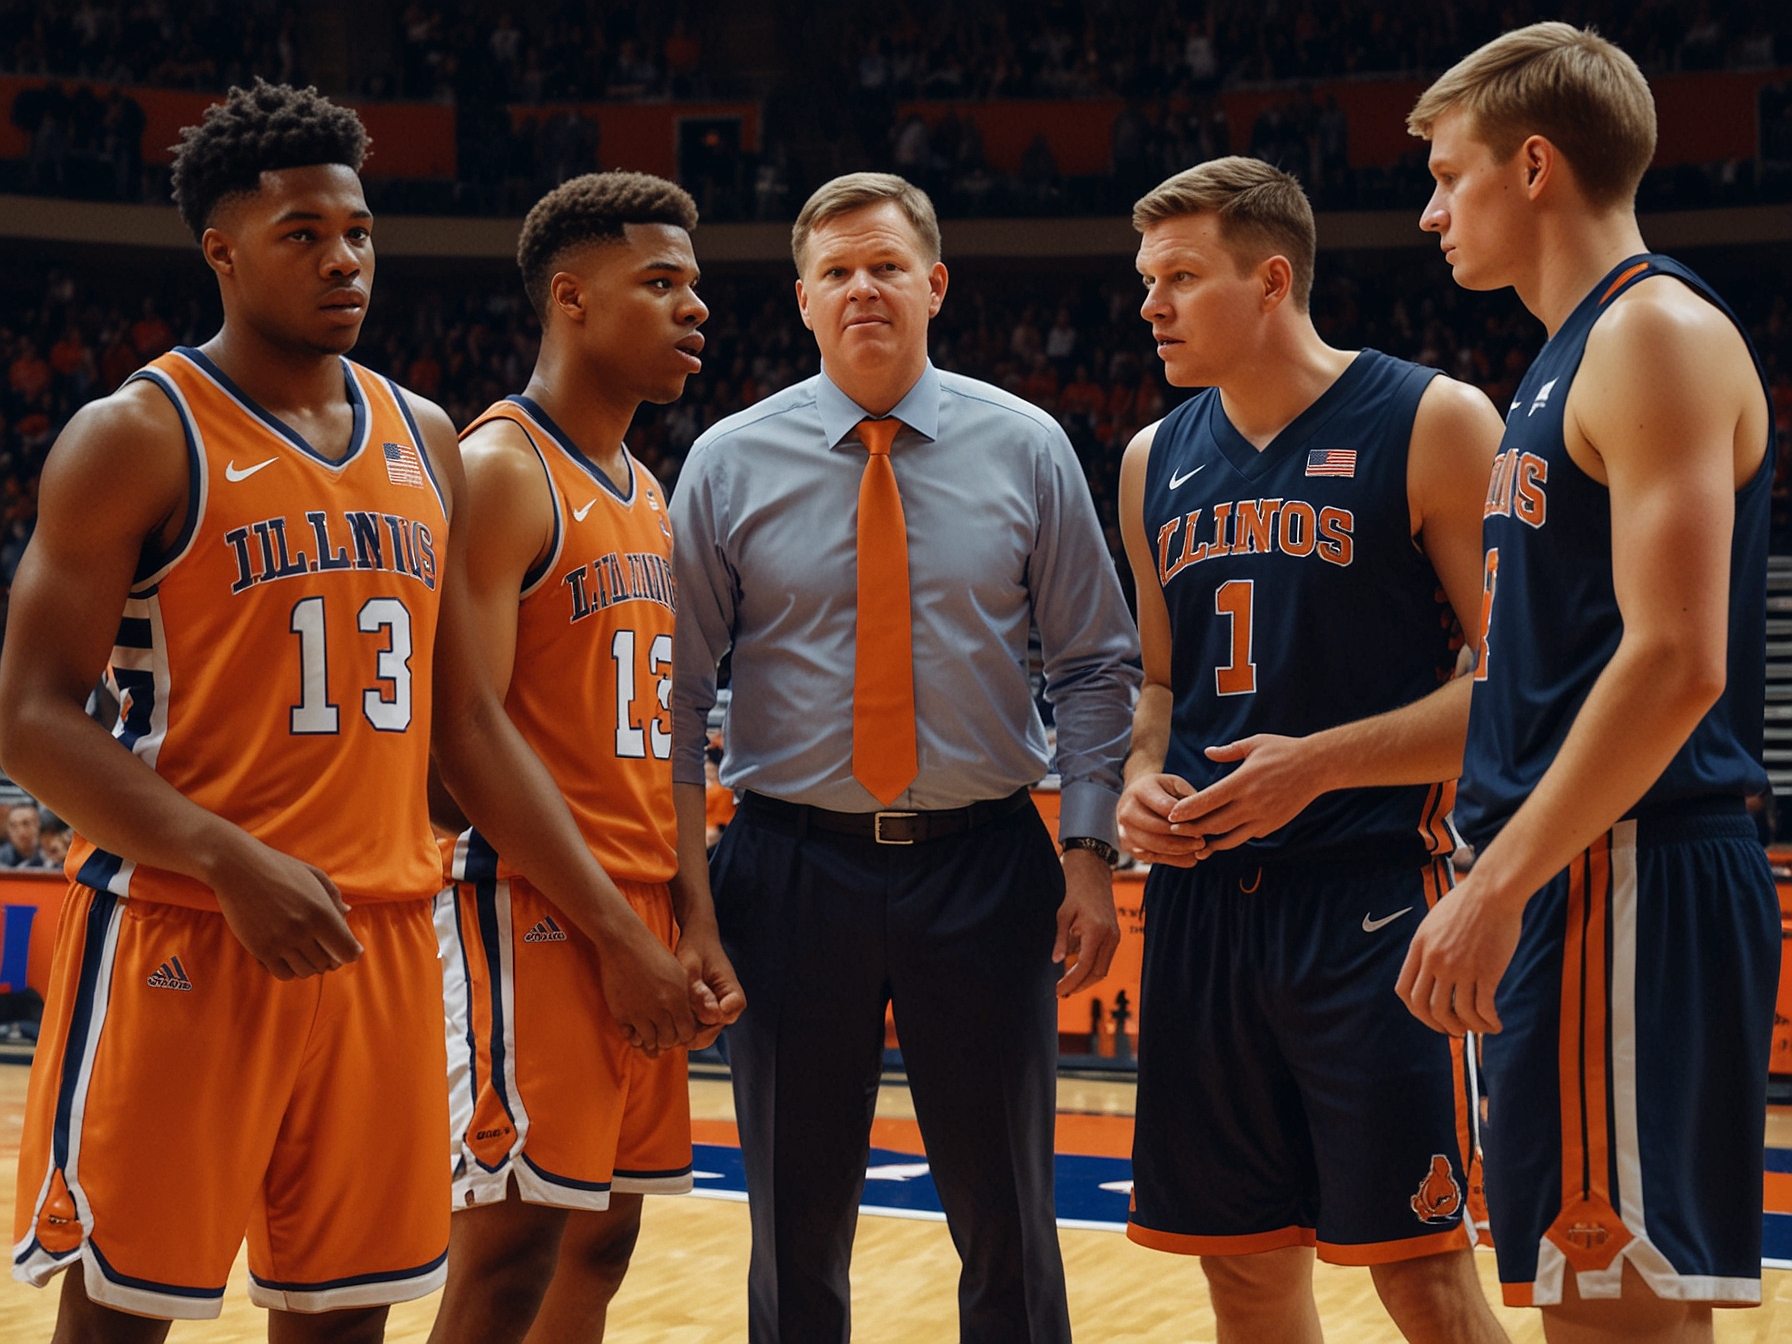 Illustration of the Illinois basketball team, highlighting Coach Brad Underwood strategizing with players. Will Riley's potential reclassification brings new excitement and possibilities for the team's future success.